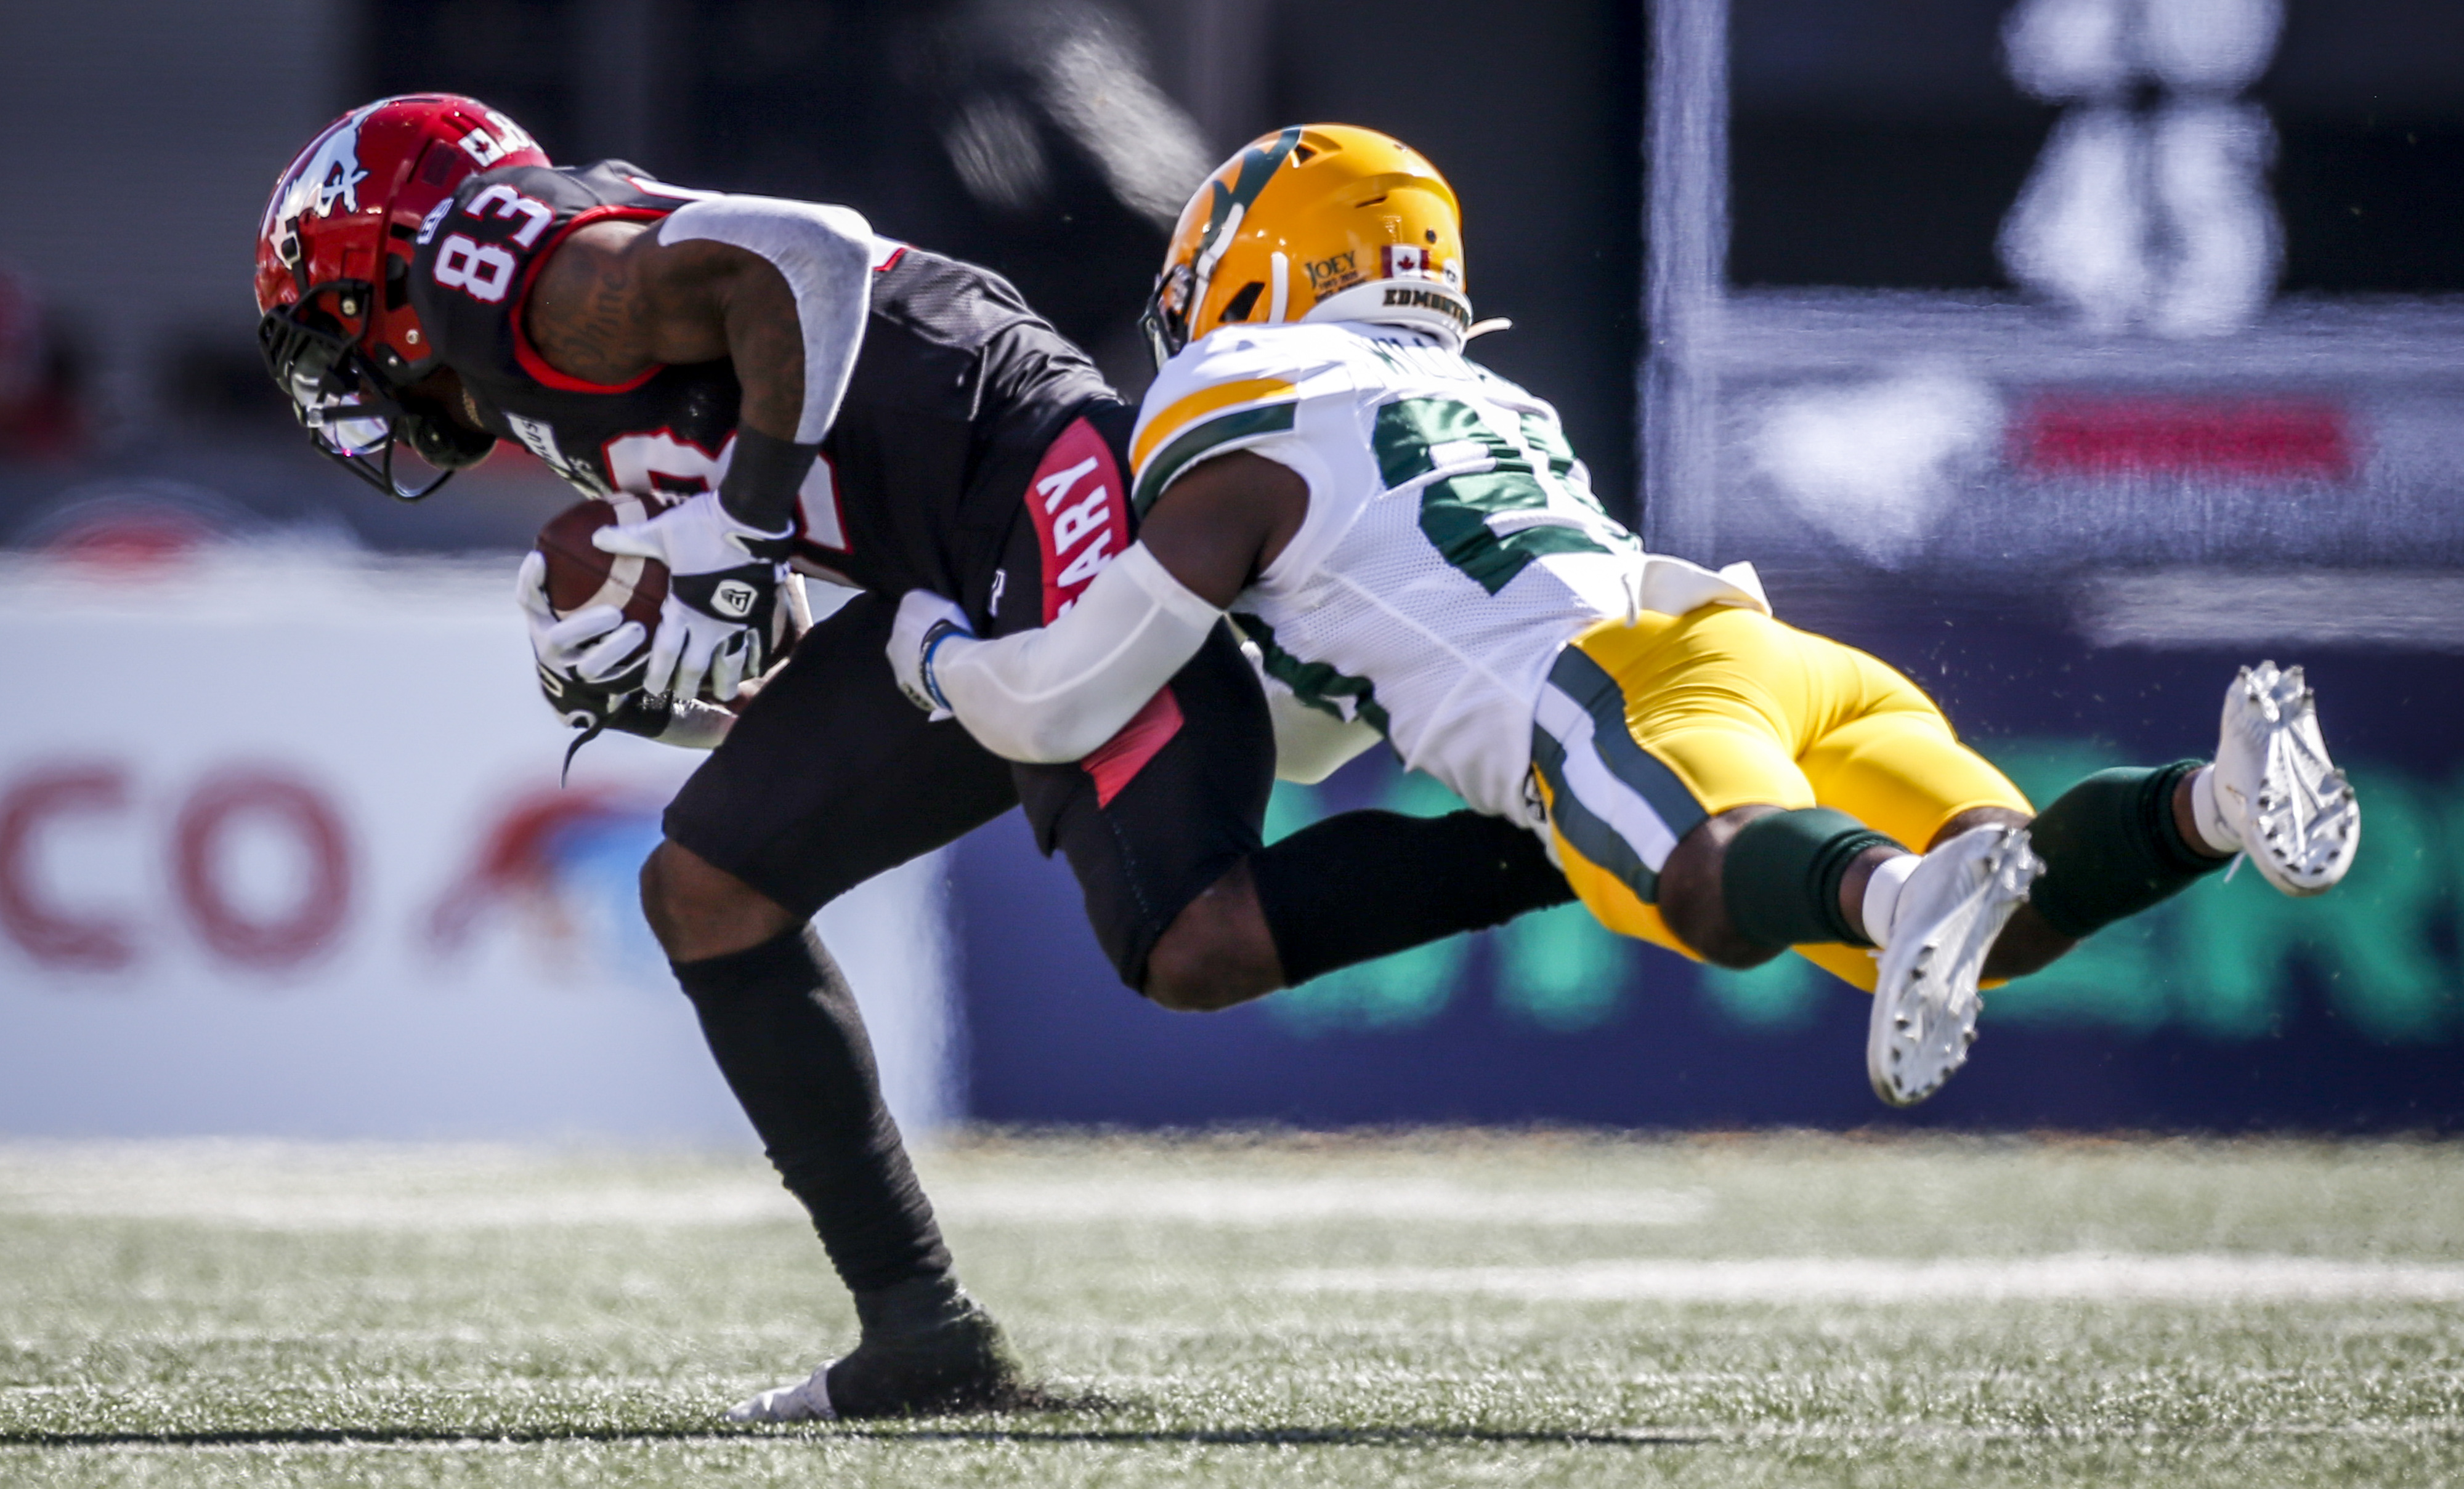 Calgary Stampeders rally to down Edmonton Elks in Labour Day Classic